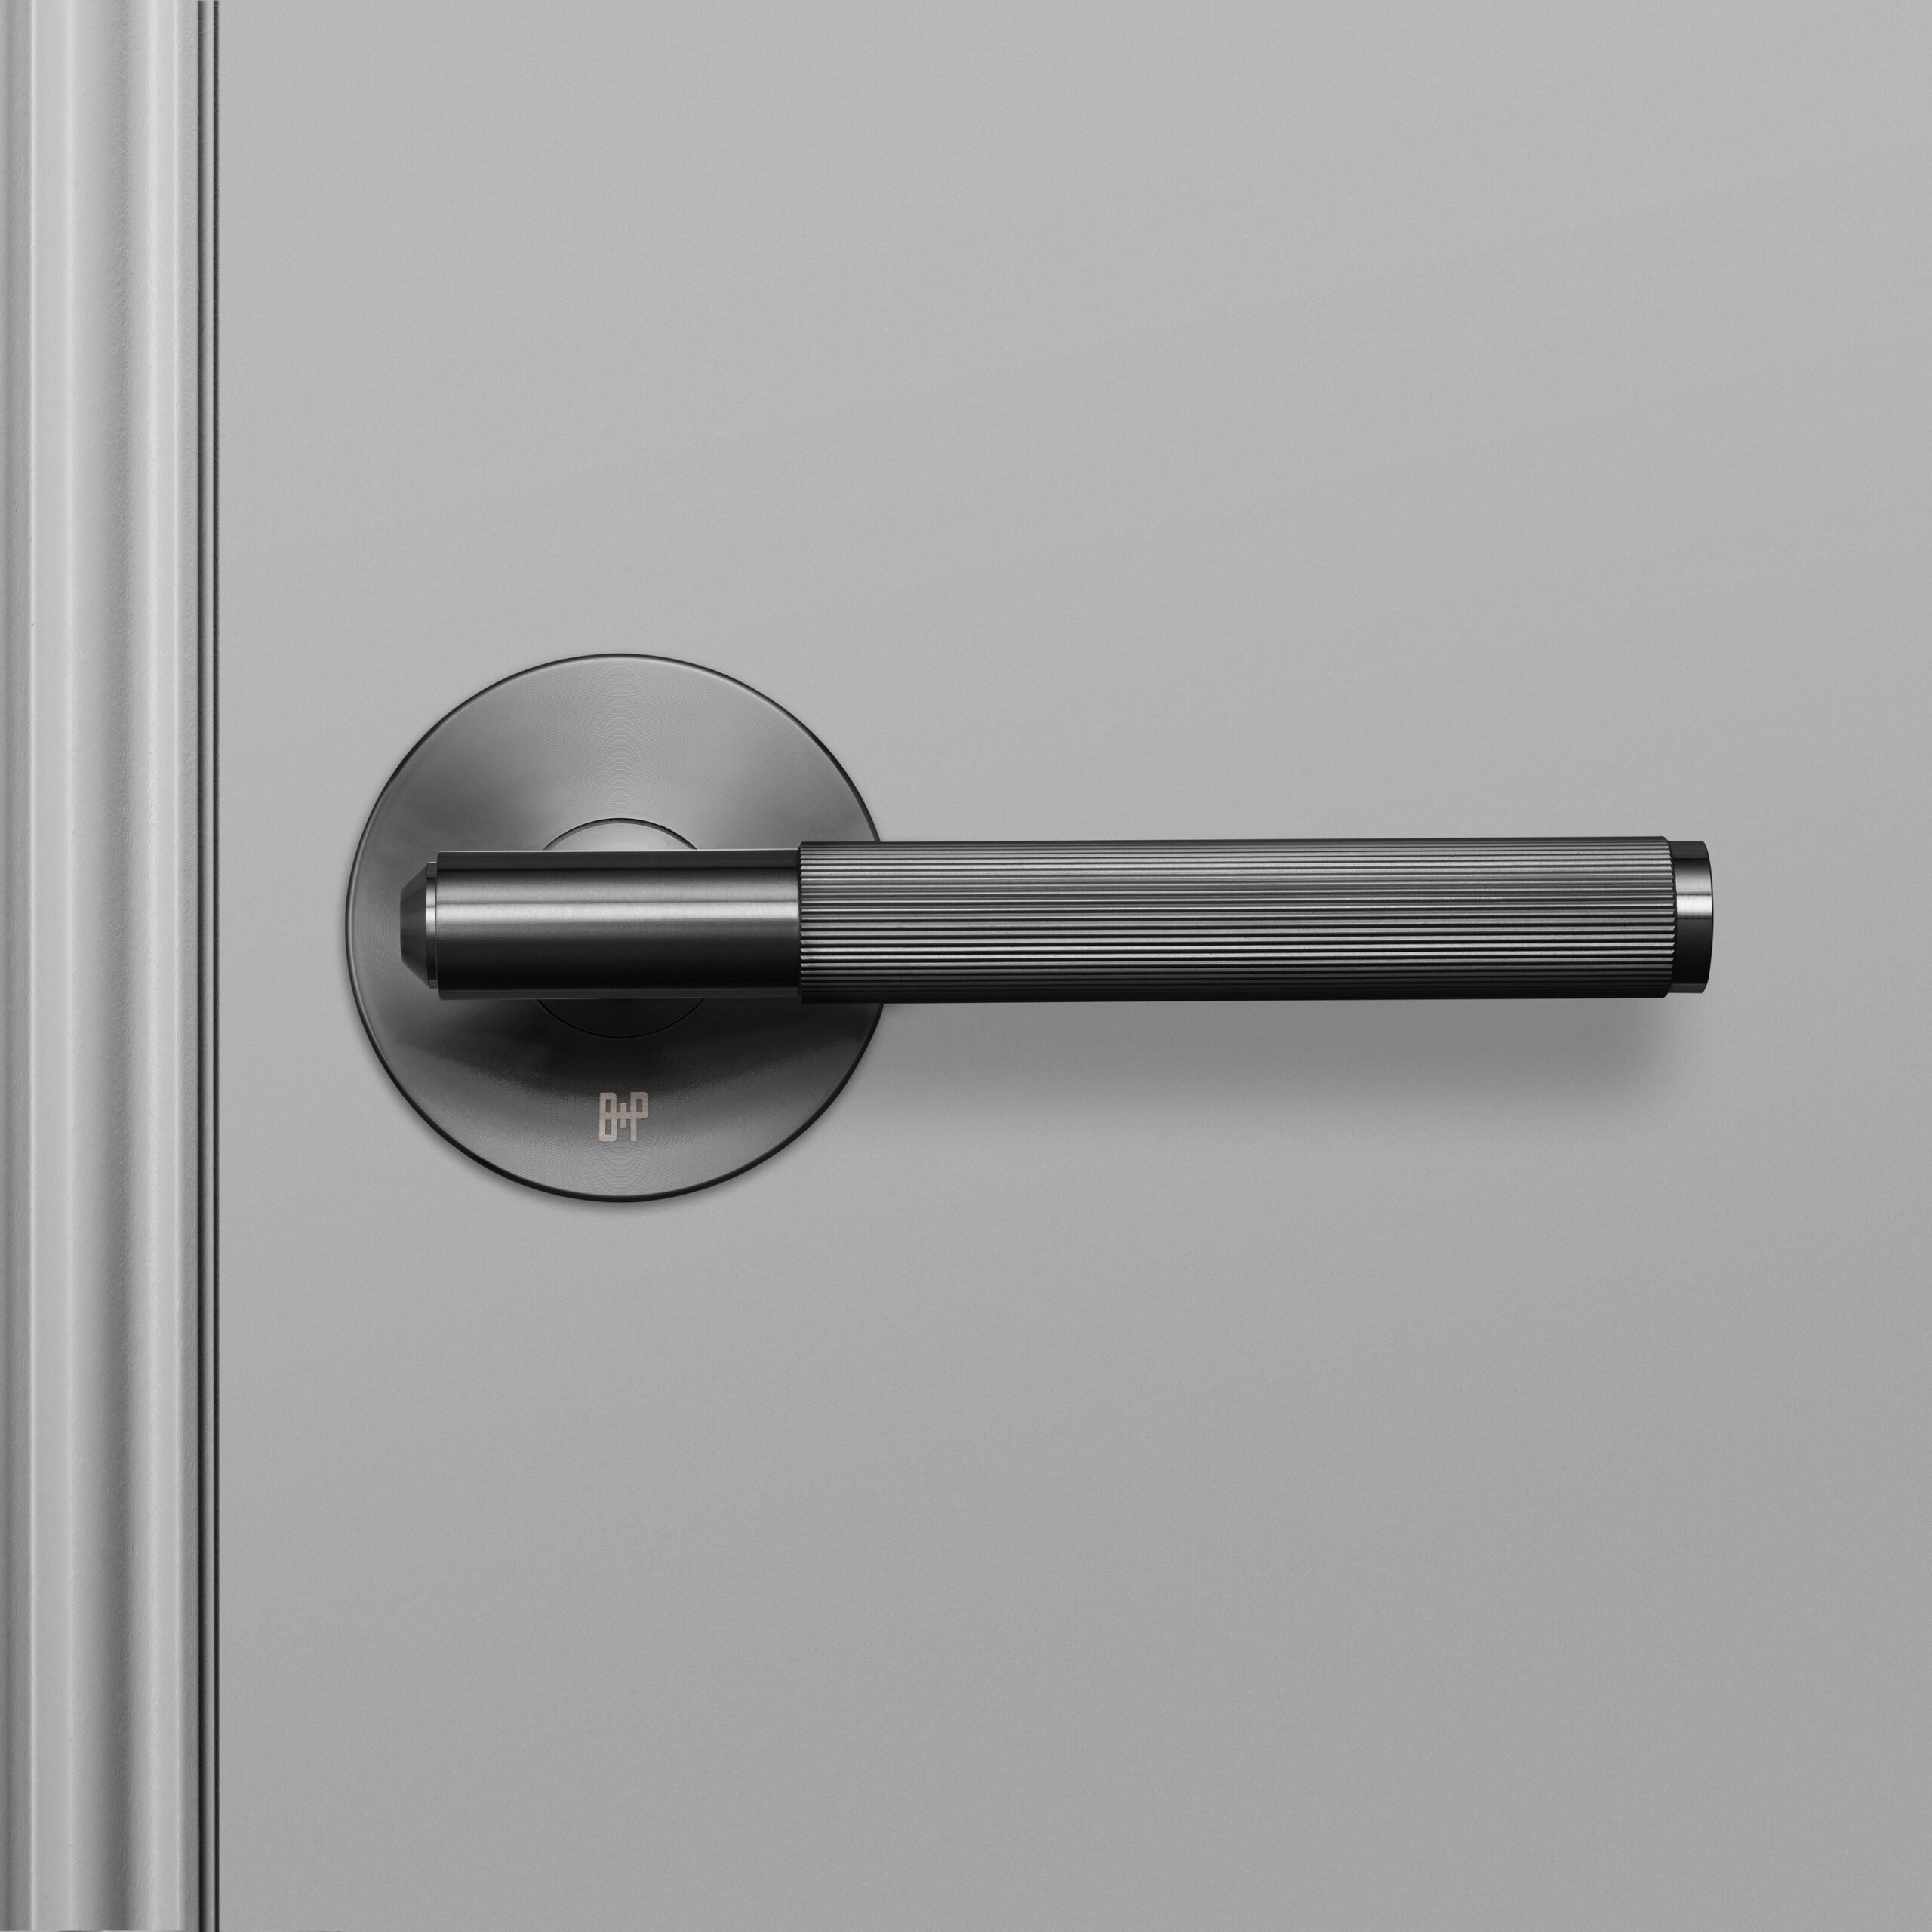 Buster + Punch Conventional Door Handle, Linear Design - PRIVACY TYPE Hardware Buster + Punch Gun Metal  